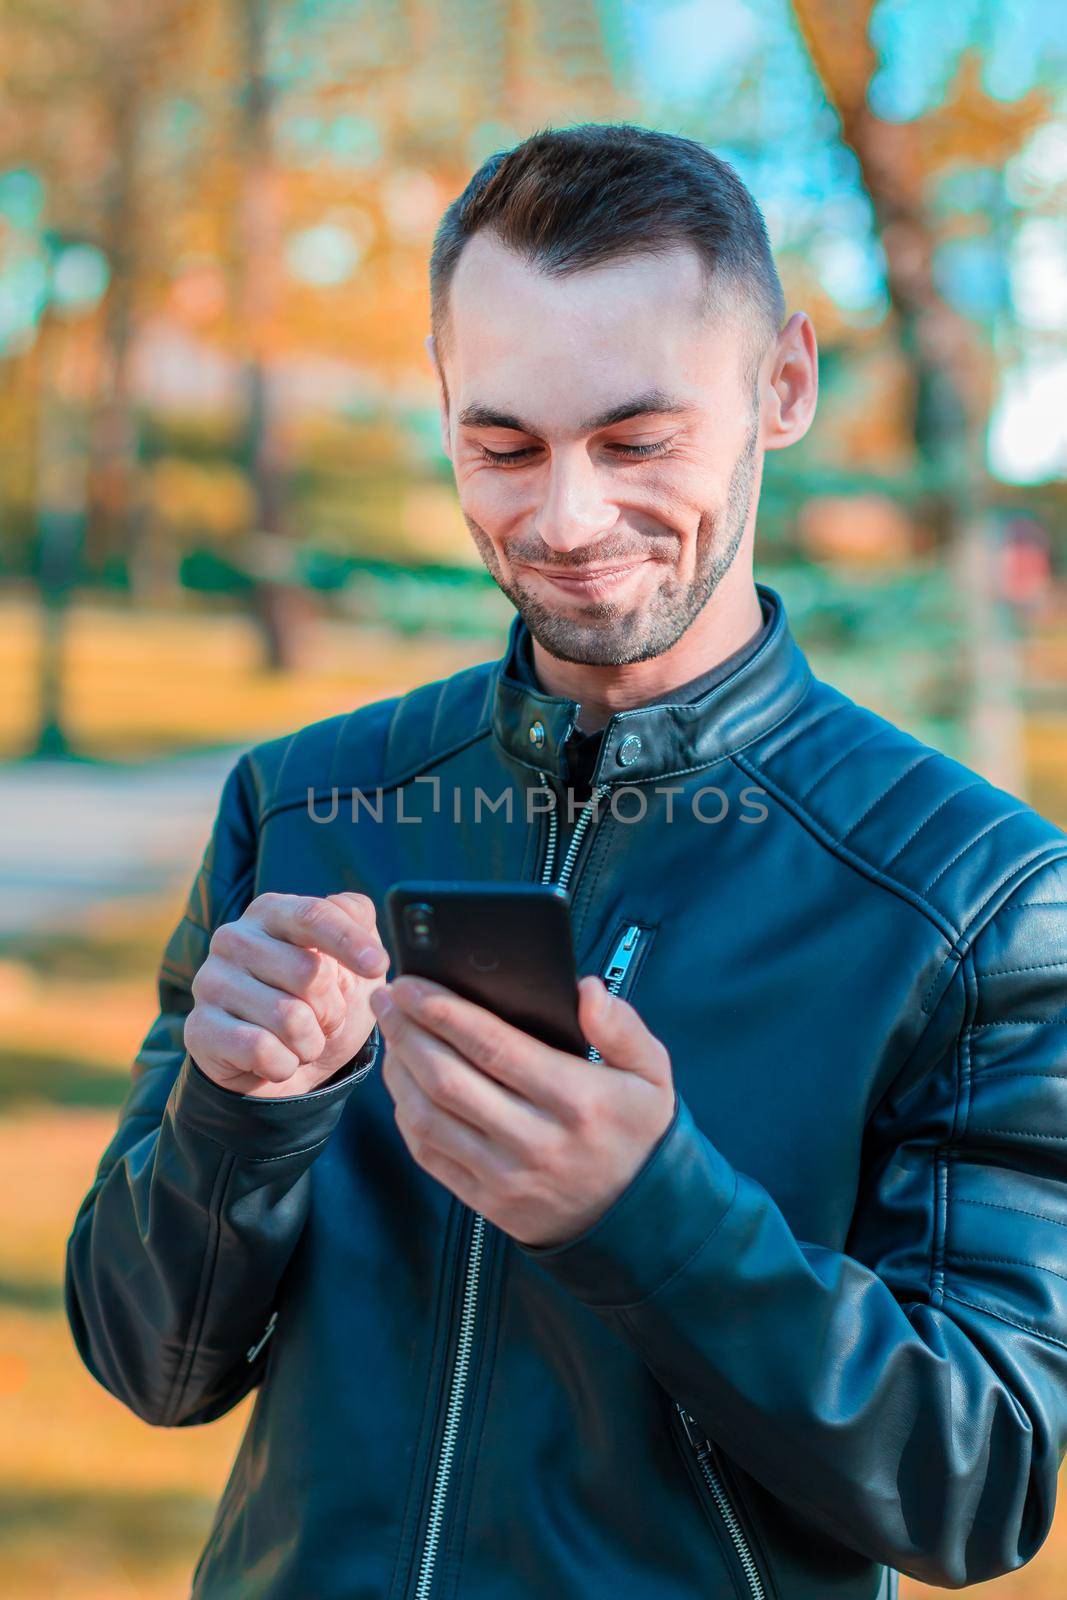 Youthful Satisfied Guy Using Black Smartphone at the Beautiful Autumn Park. Handsome Smiling Young Man with Mobile Phone at Sunny Day - Medium CloseUp Portrait